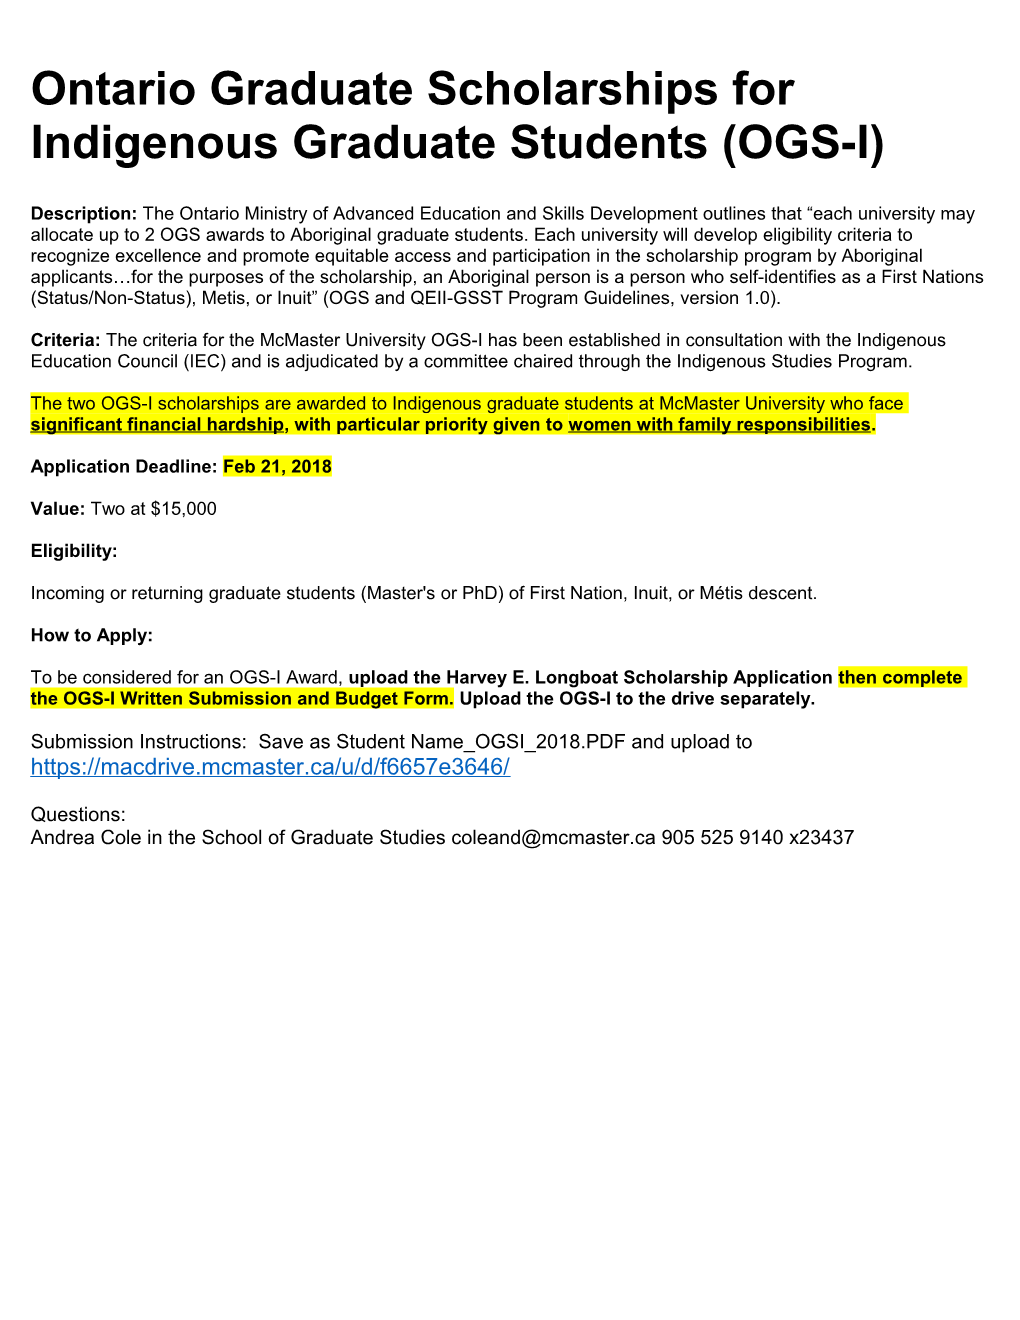 Ontario Graduate Scholarships for Indigenous Graduate Students (OGS-I)